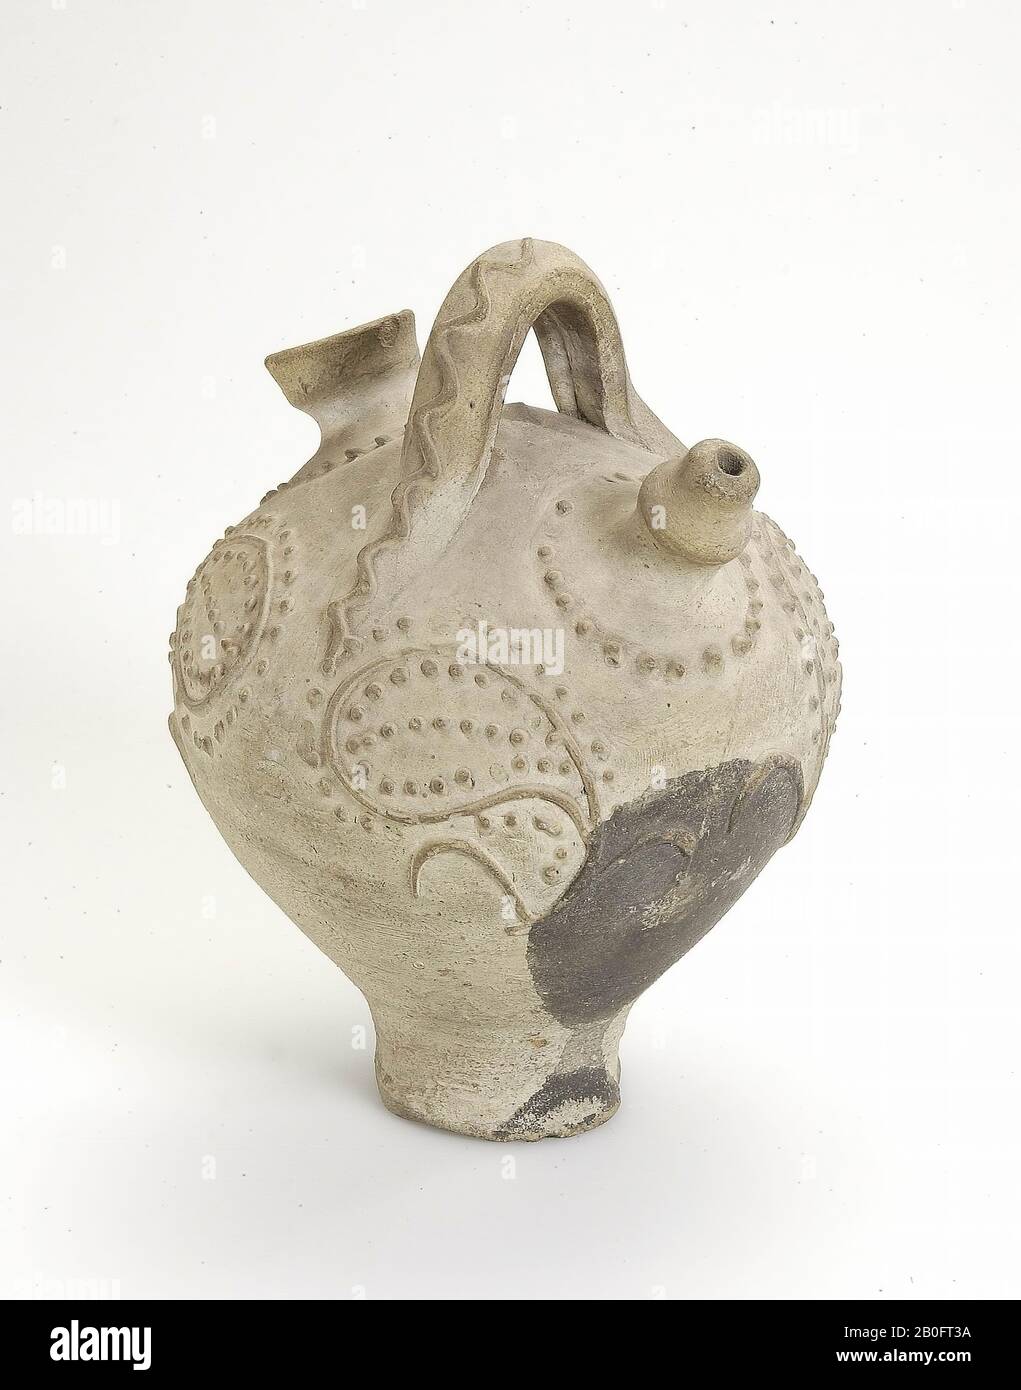 Jug of smooth-walled earthenware with handle, spout and opening for pouring contents. Imprinted decoration., According to Dr. Max Siebourg in Bonn, recent pottery from Spain !!, jug, earthenware (smooth wall), h: 15,5 cm, diam: 11,4 cm, not 1500-1900 AD, Germany, unknown, unknown, unknown Stock Photo